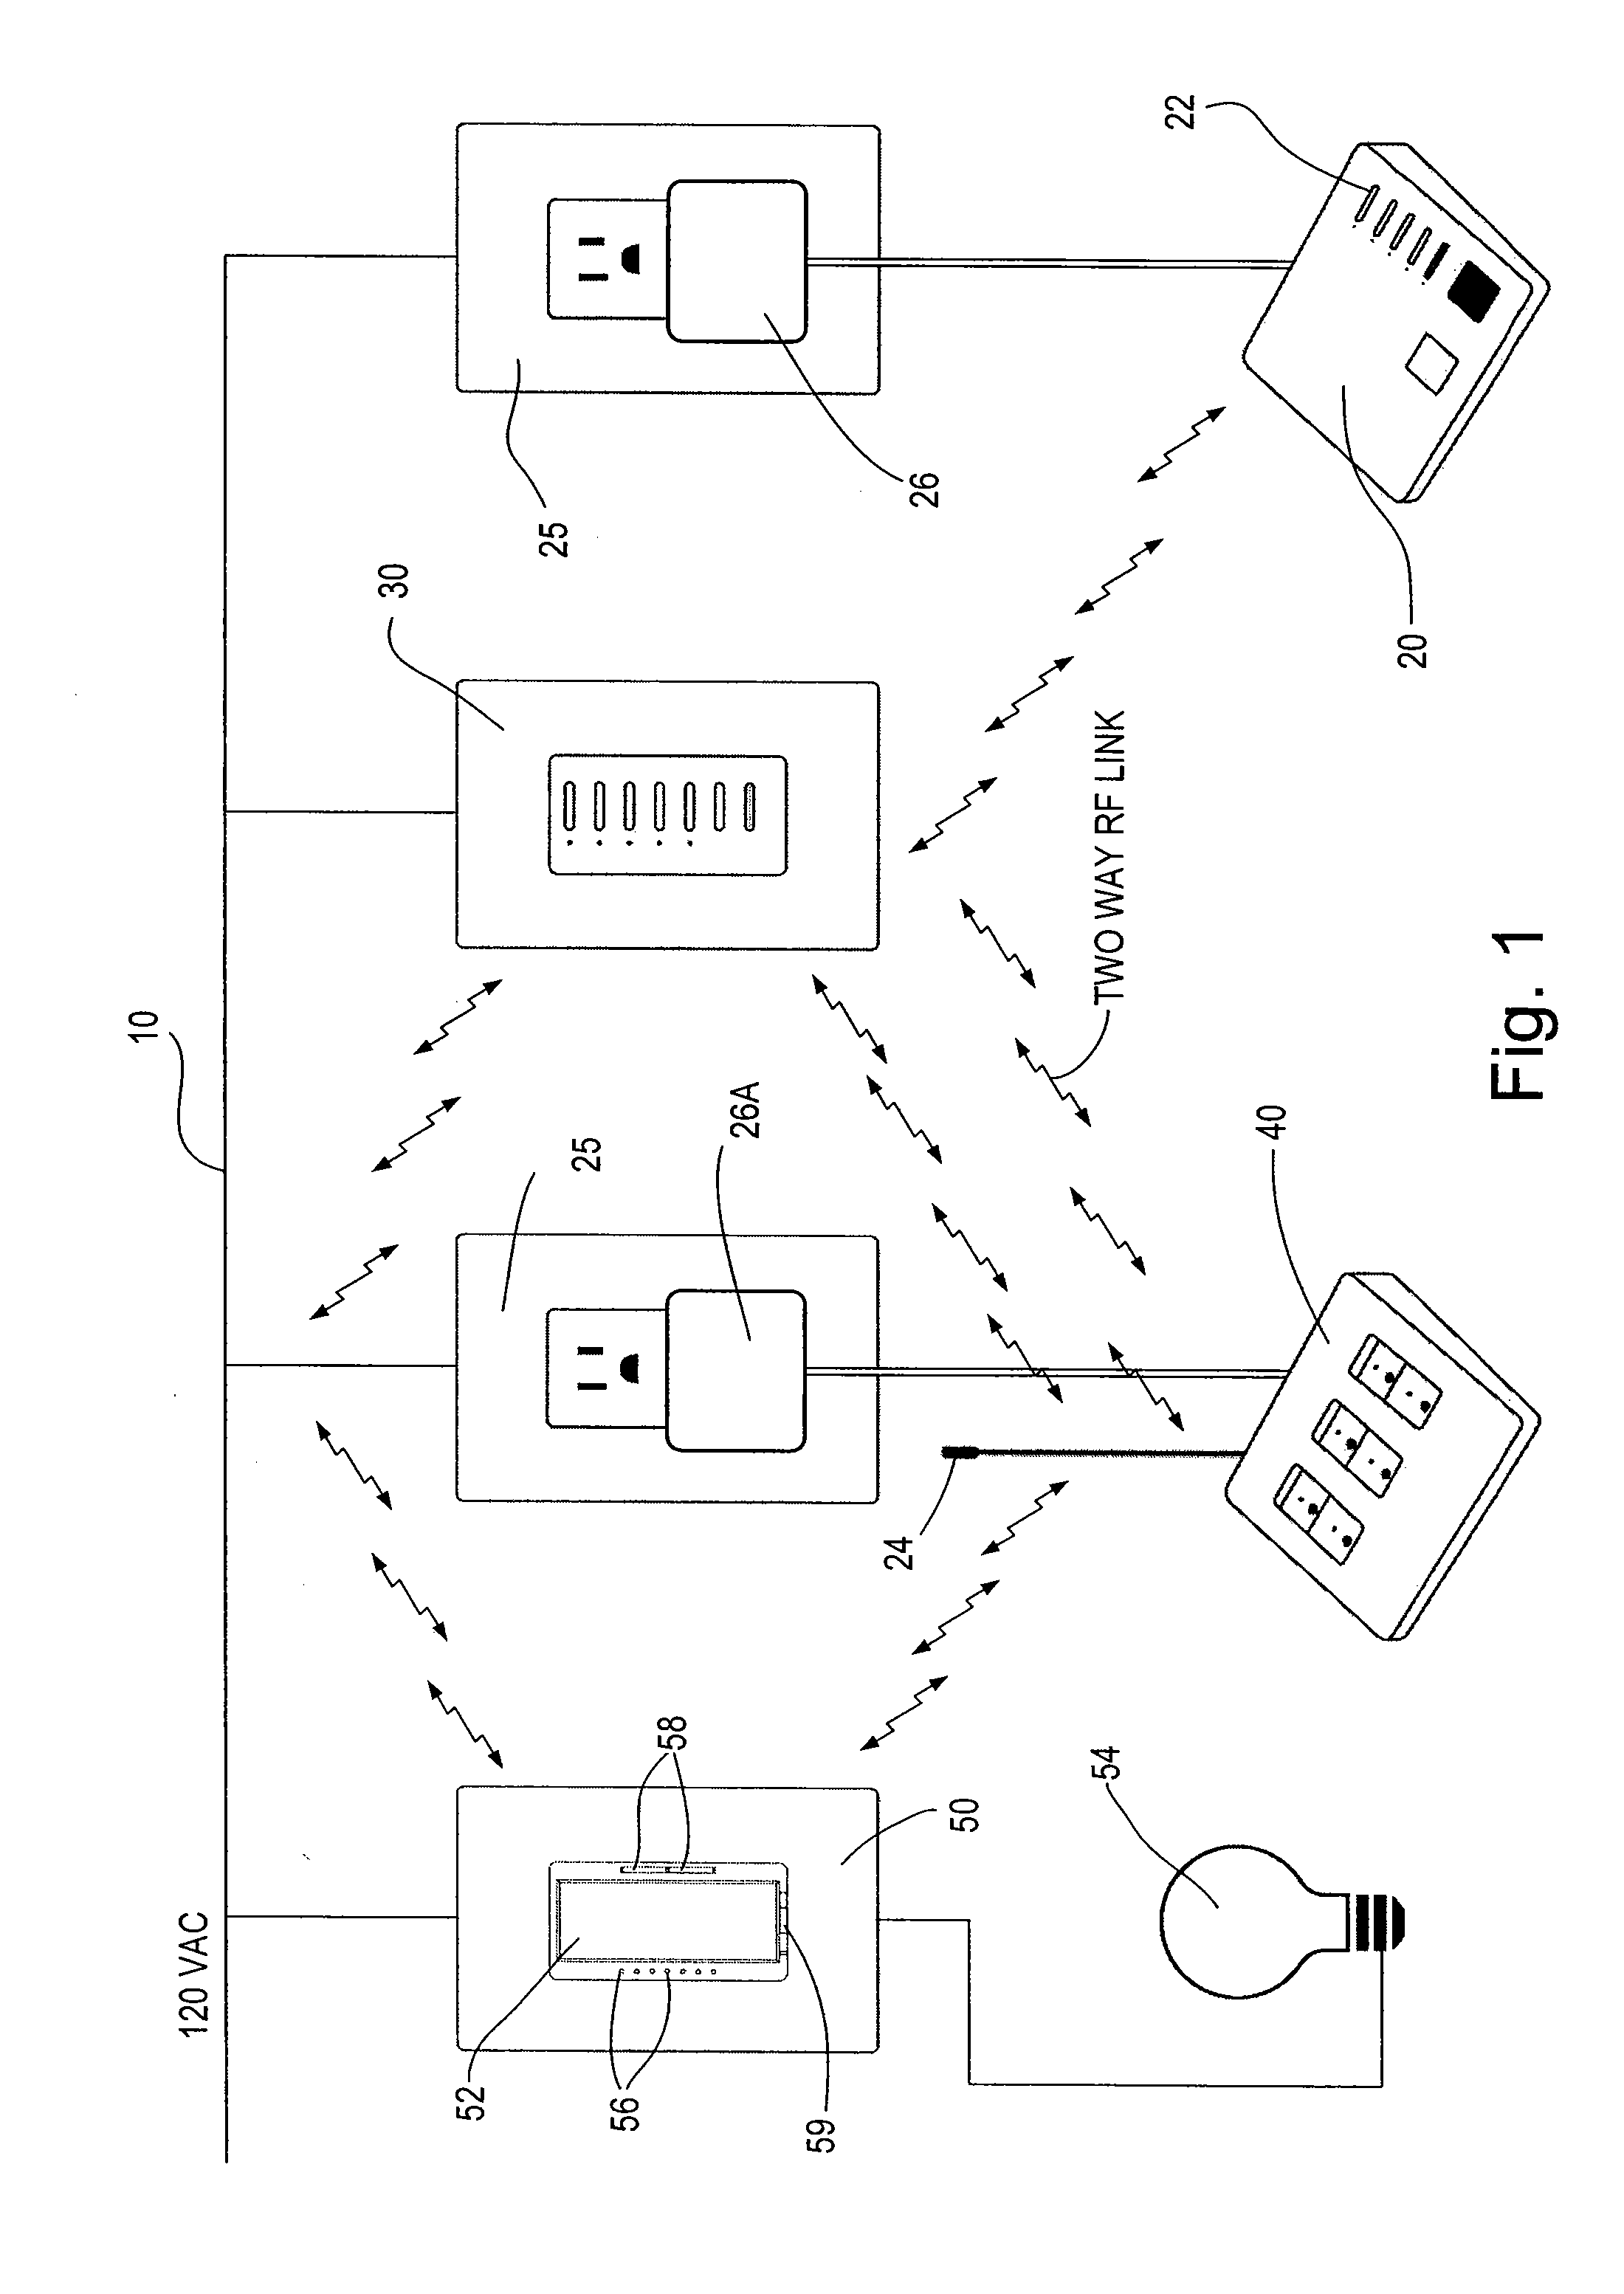 Compact radio frequency transmitting and receiving antenna and control device employing same